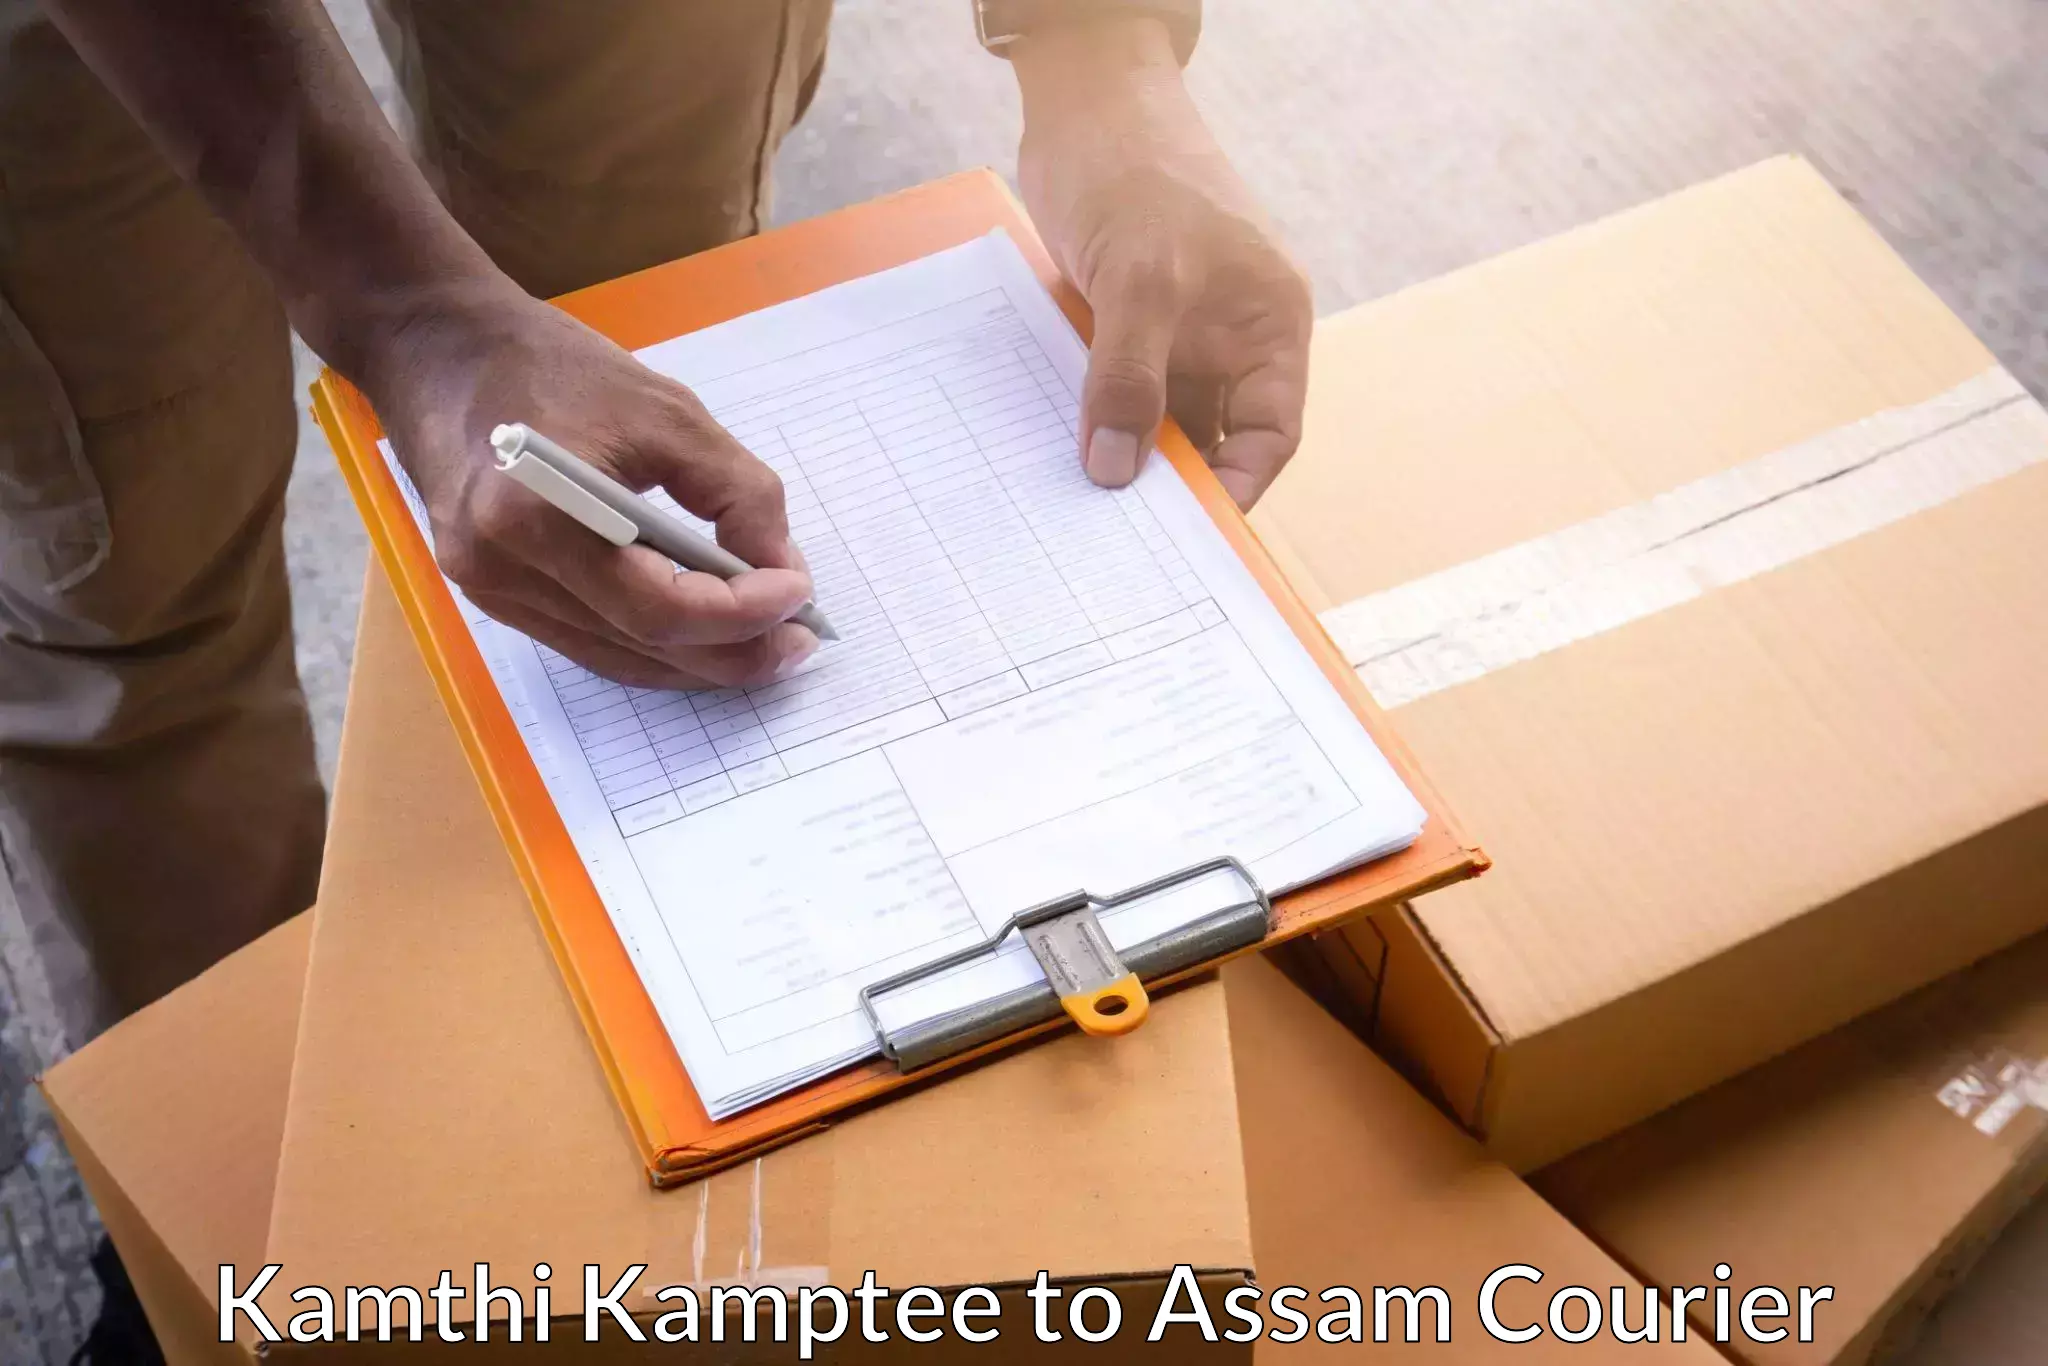 Courier services Kamthi Kamptee to Banderdewa